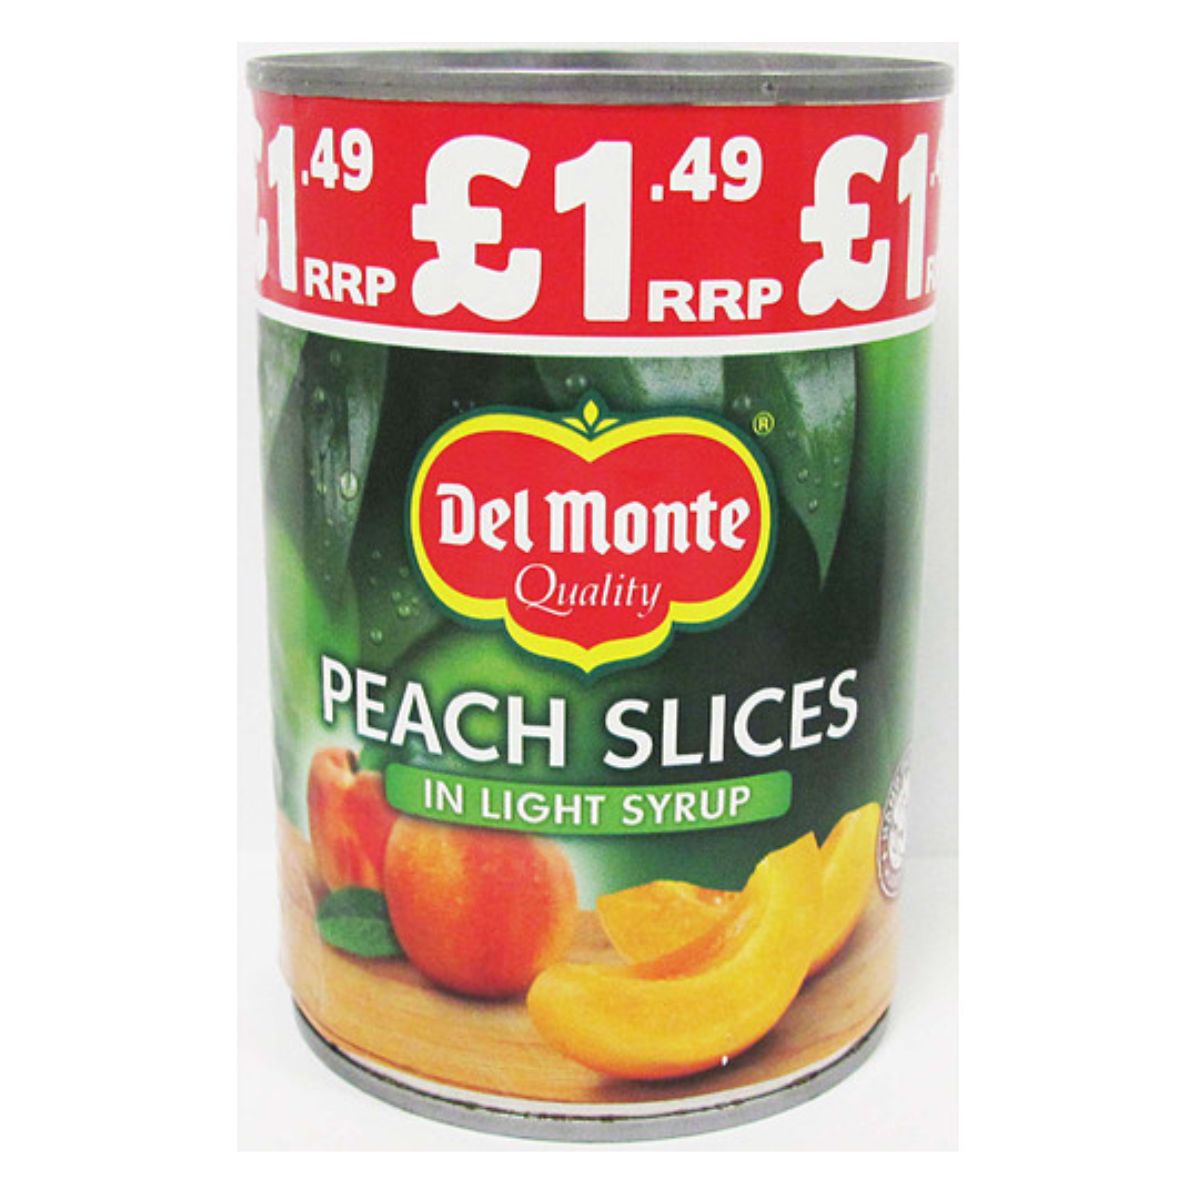 A can of Del Monte - Peach Slices In Light Syrup - 420g with price tags.